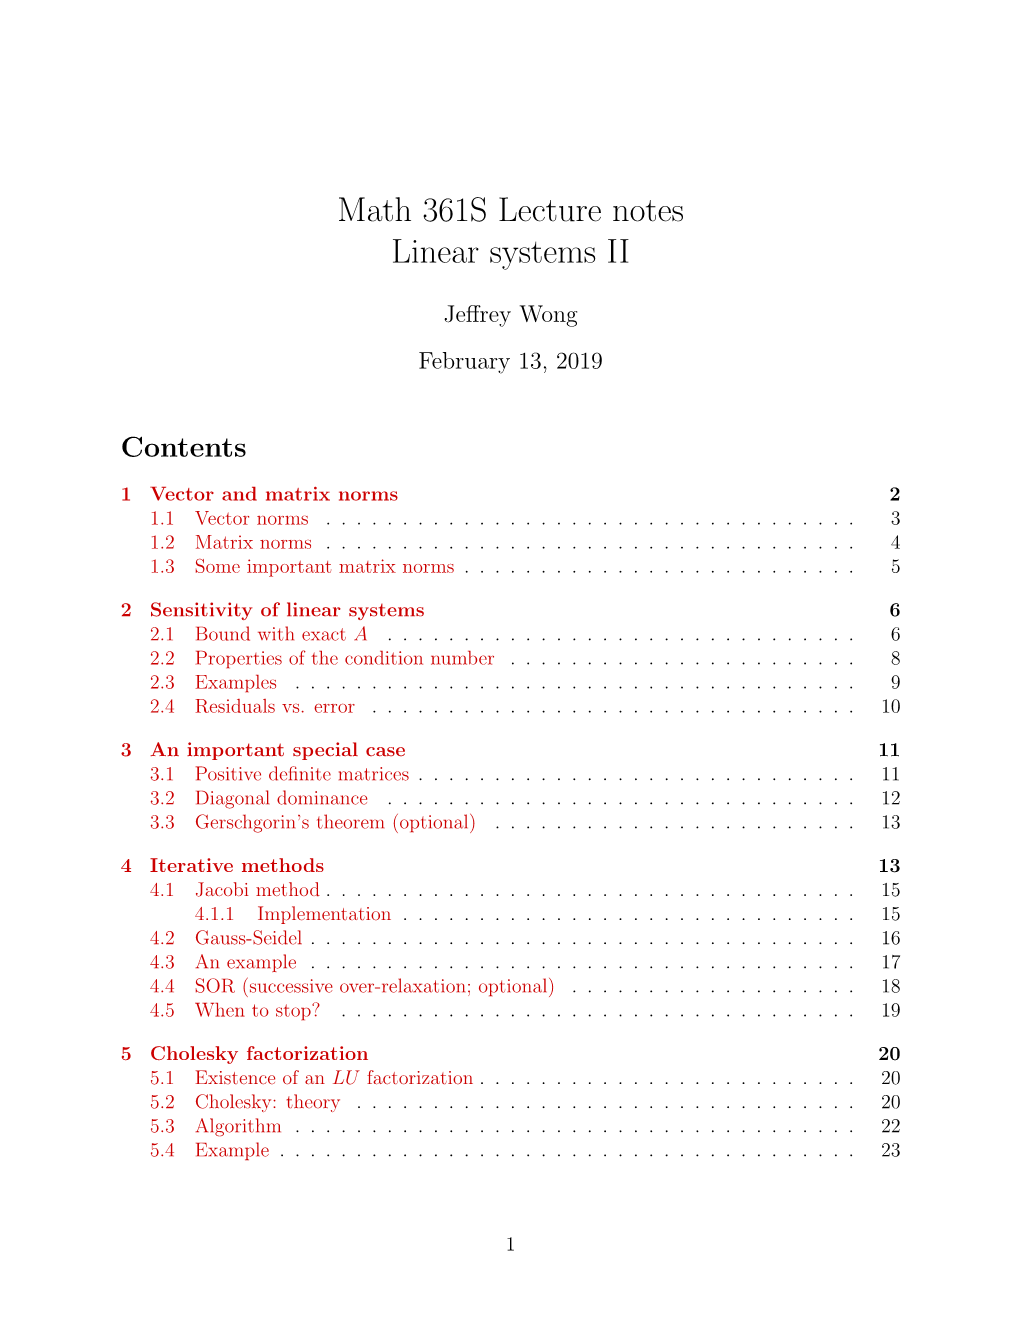 Math 361S Lecture Notes Linear Systems II